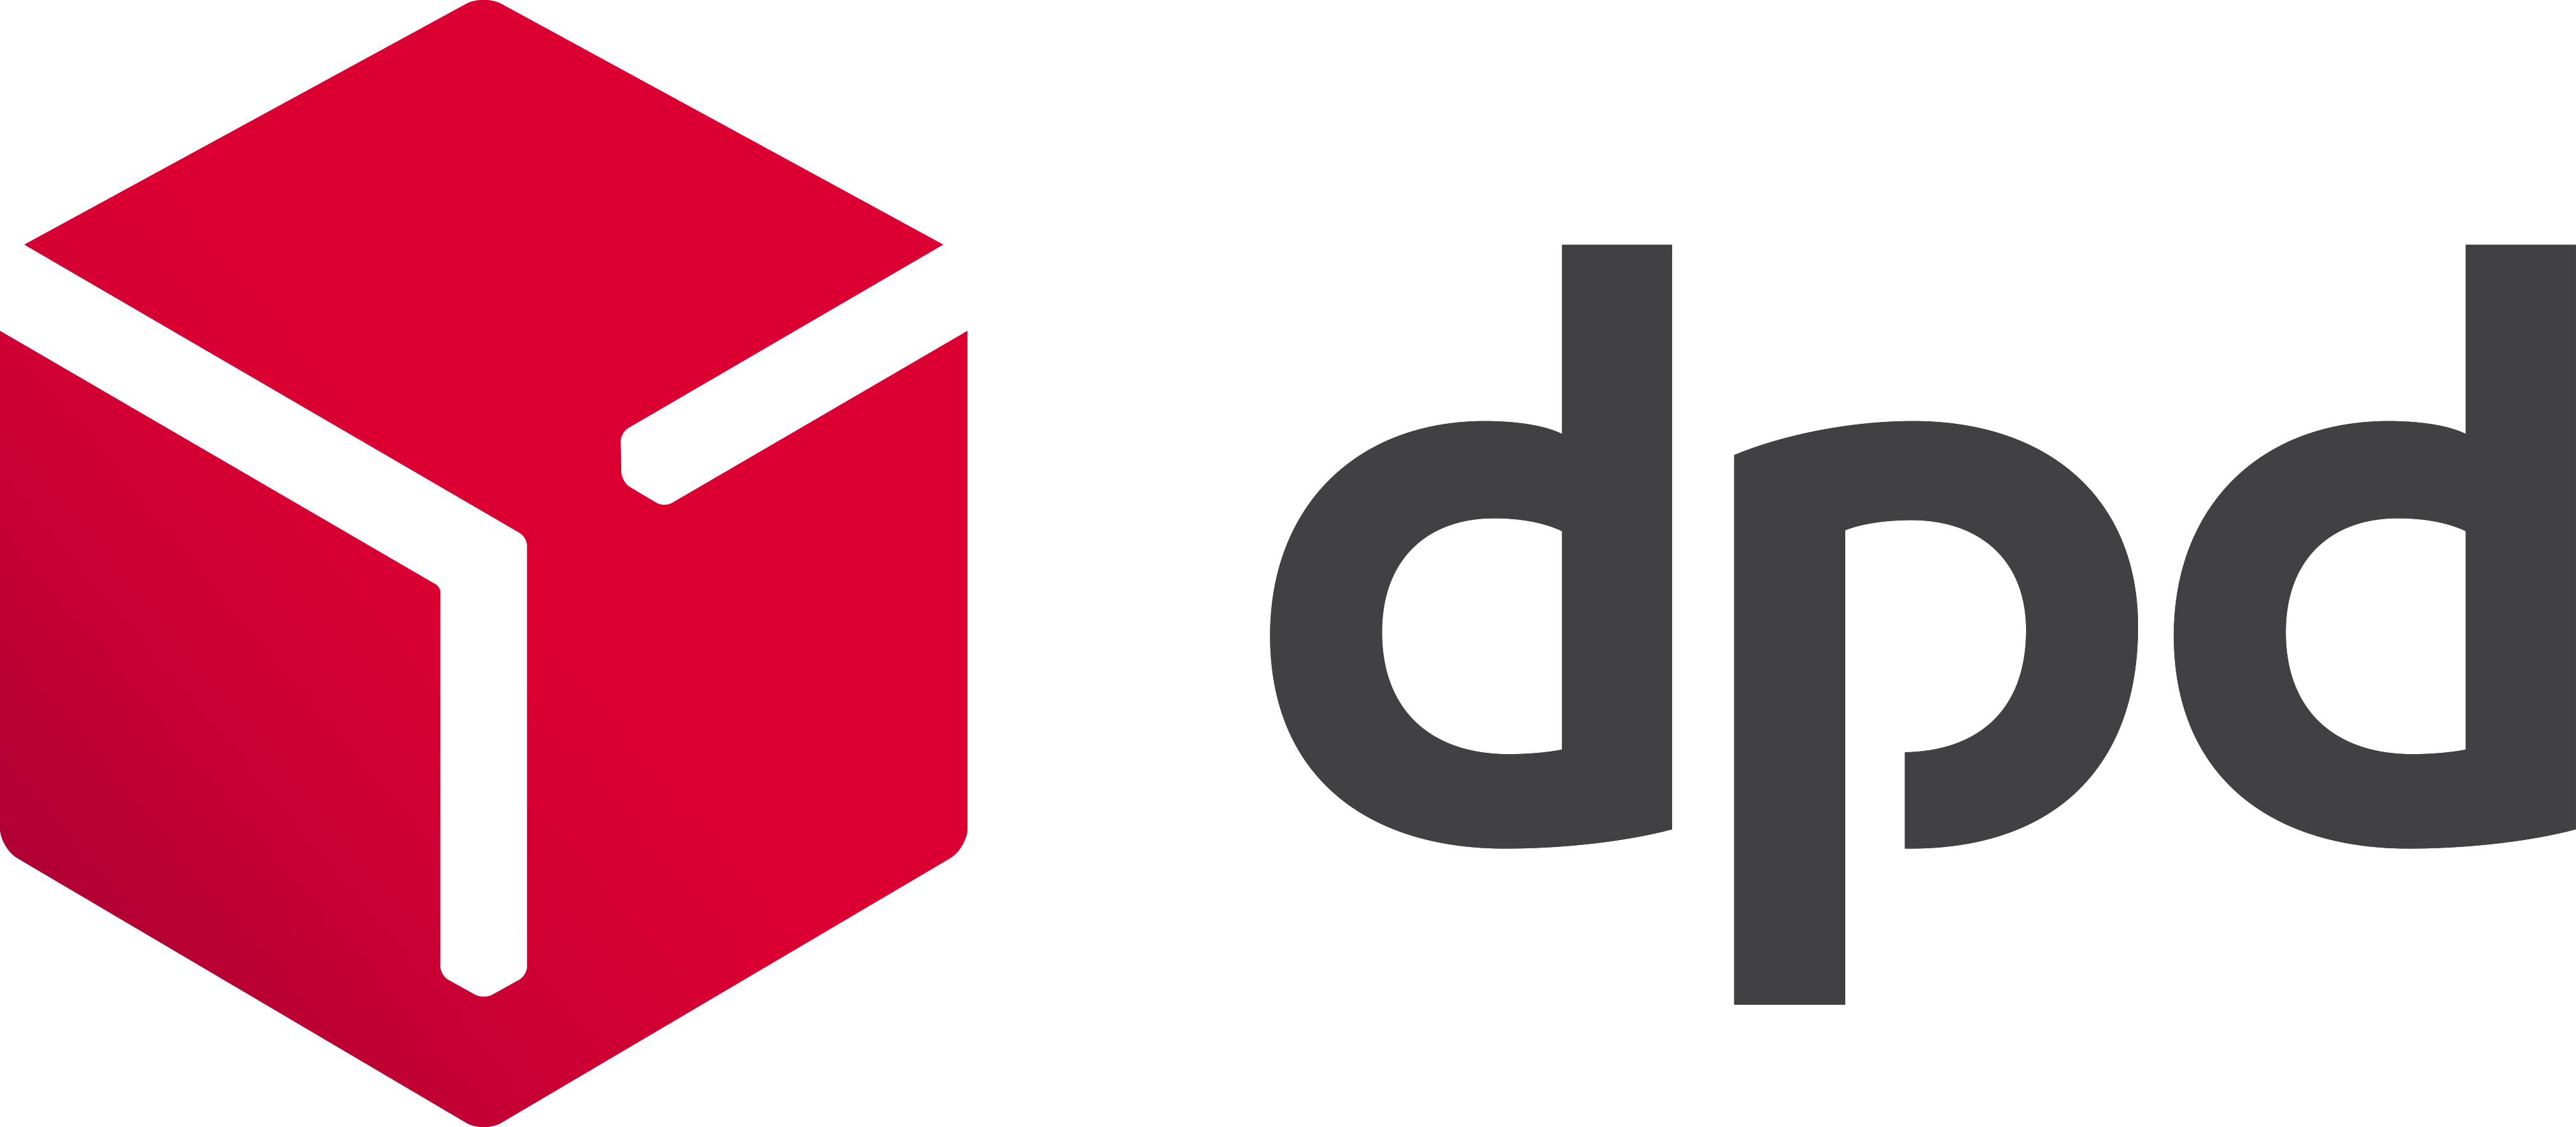 DPD_logo-red-2015.png